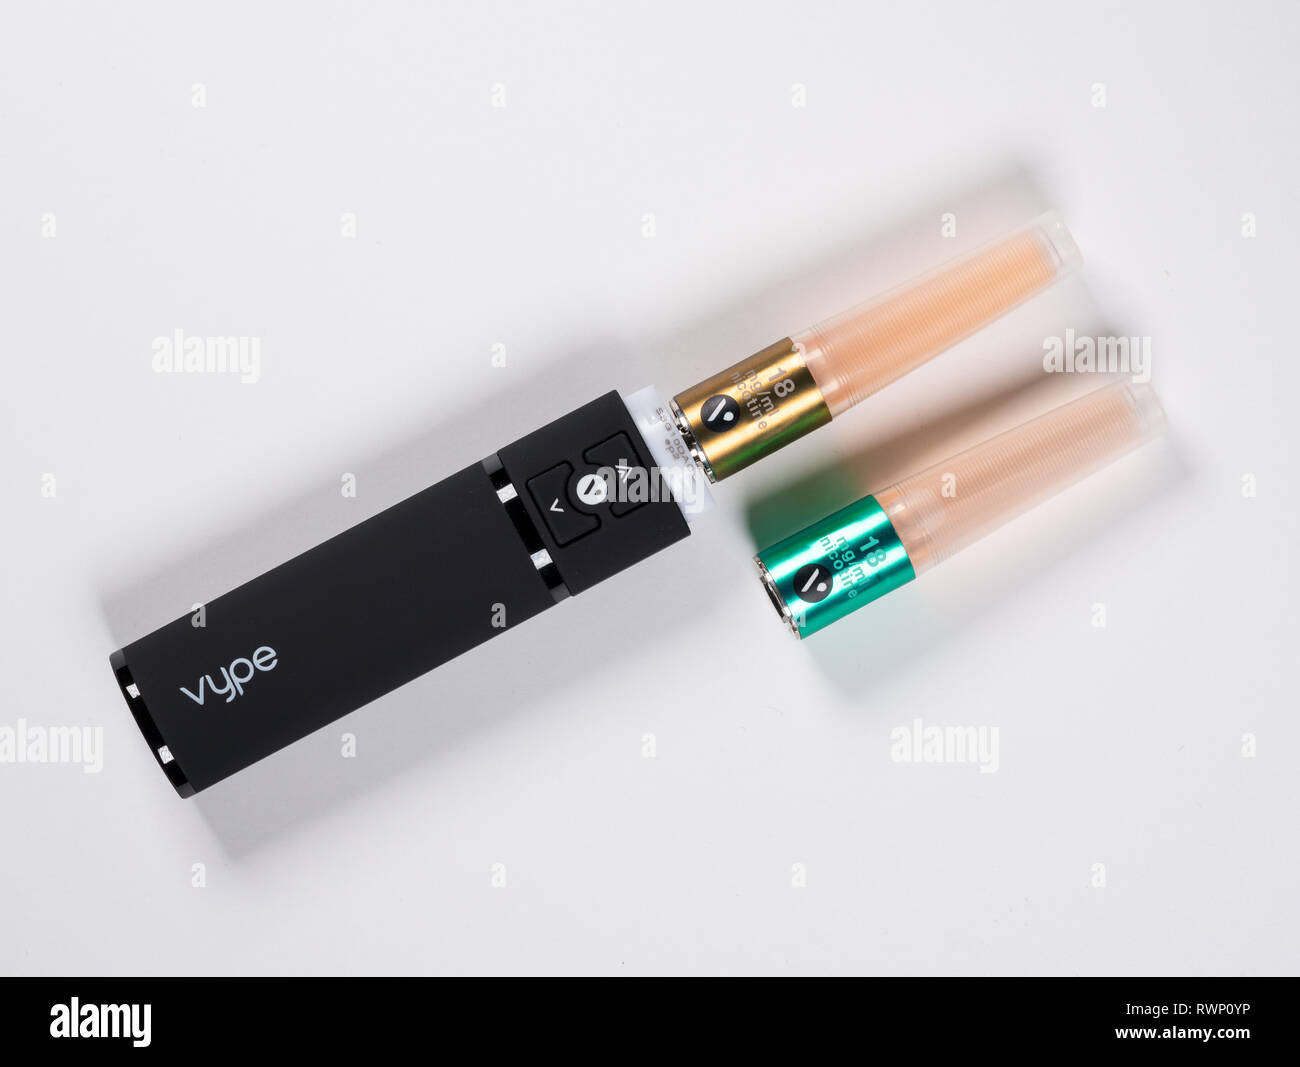 Vype ePen nicotine dispenser and caps Stock Photo - Alamy